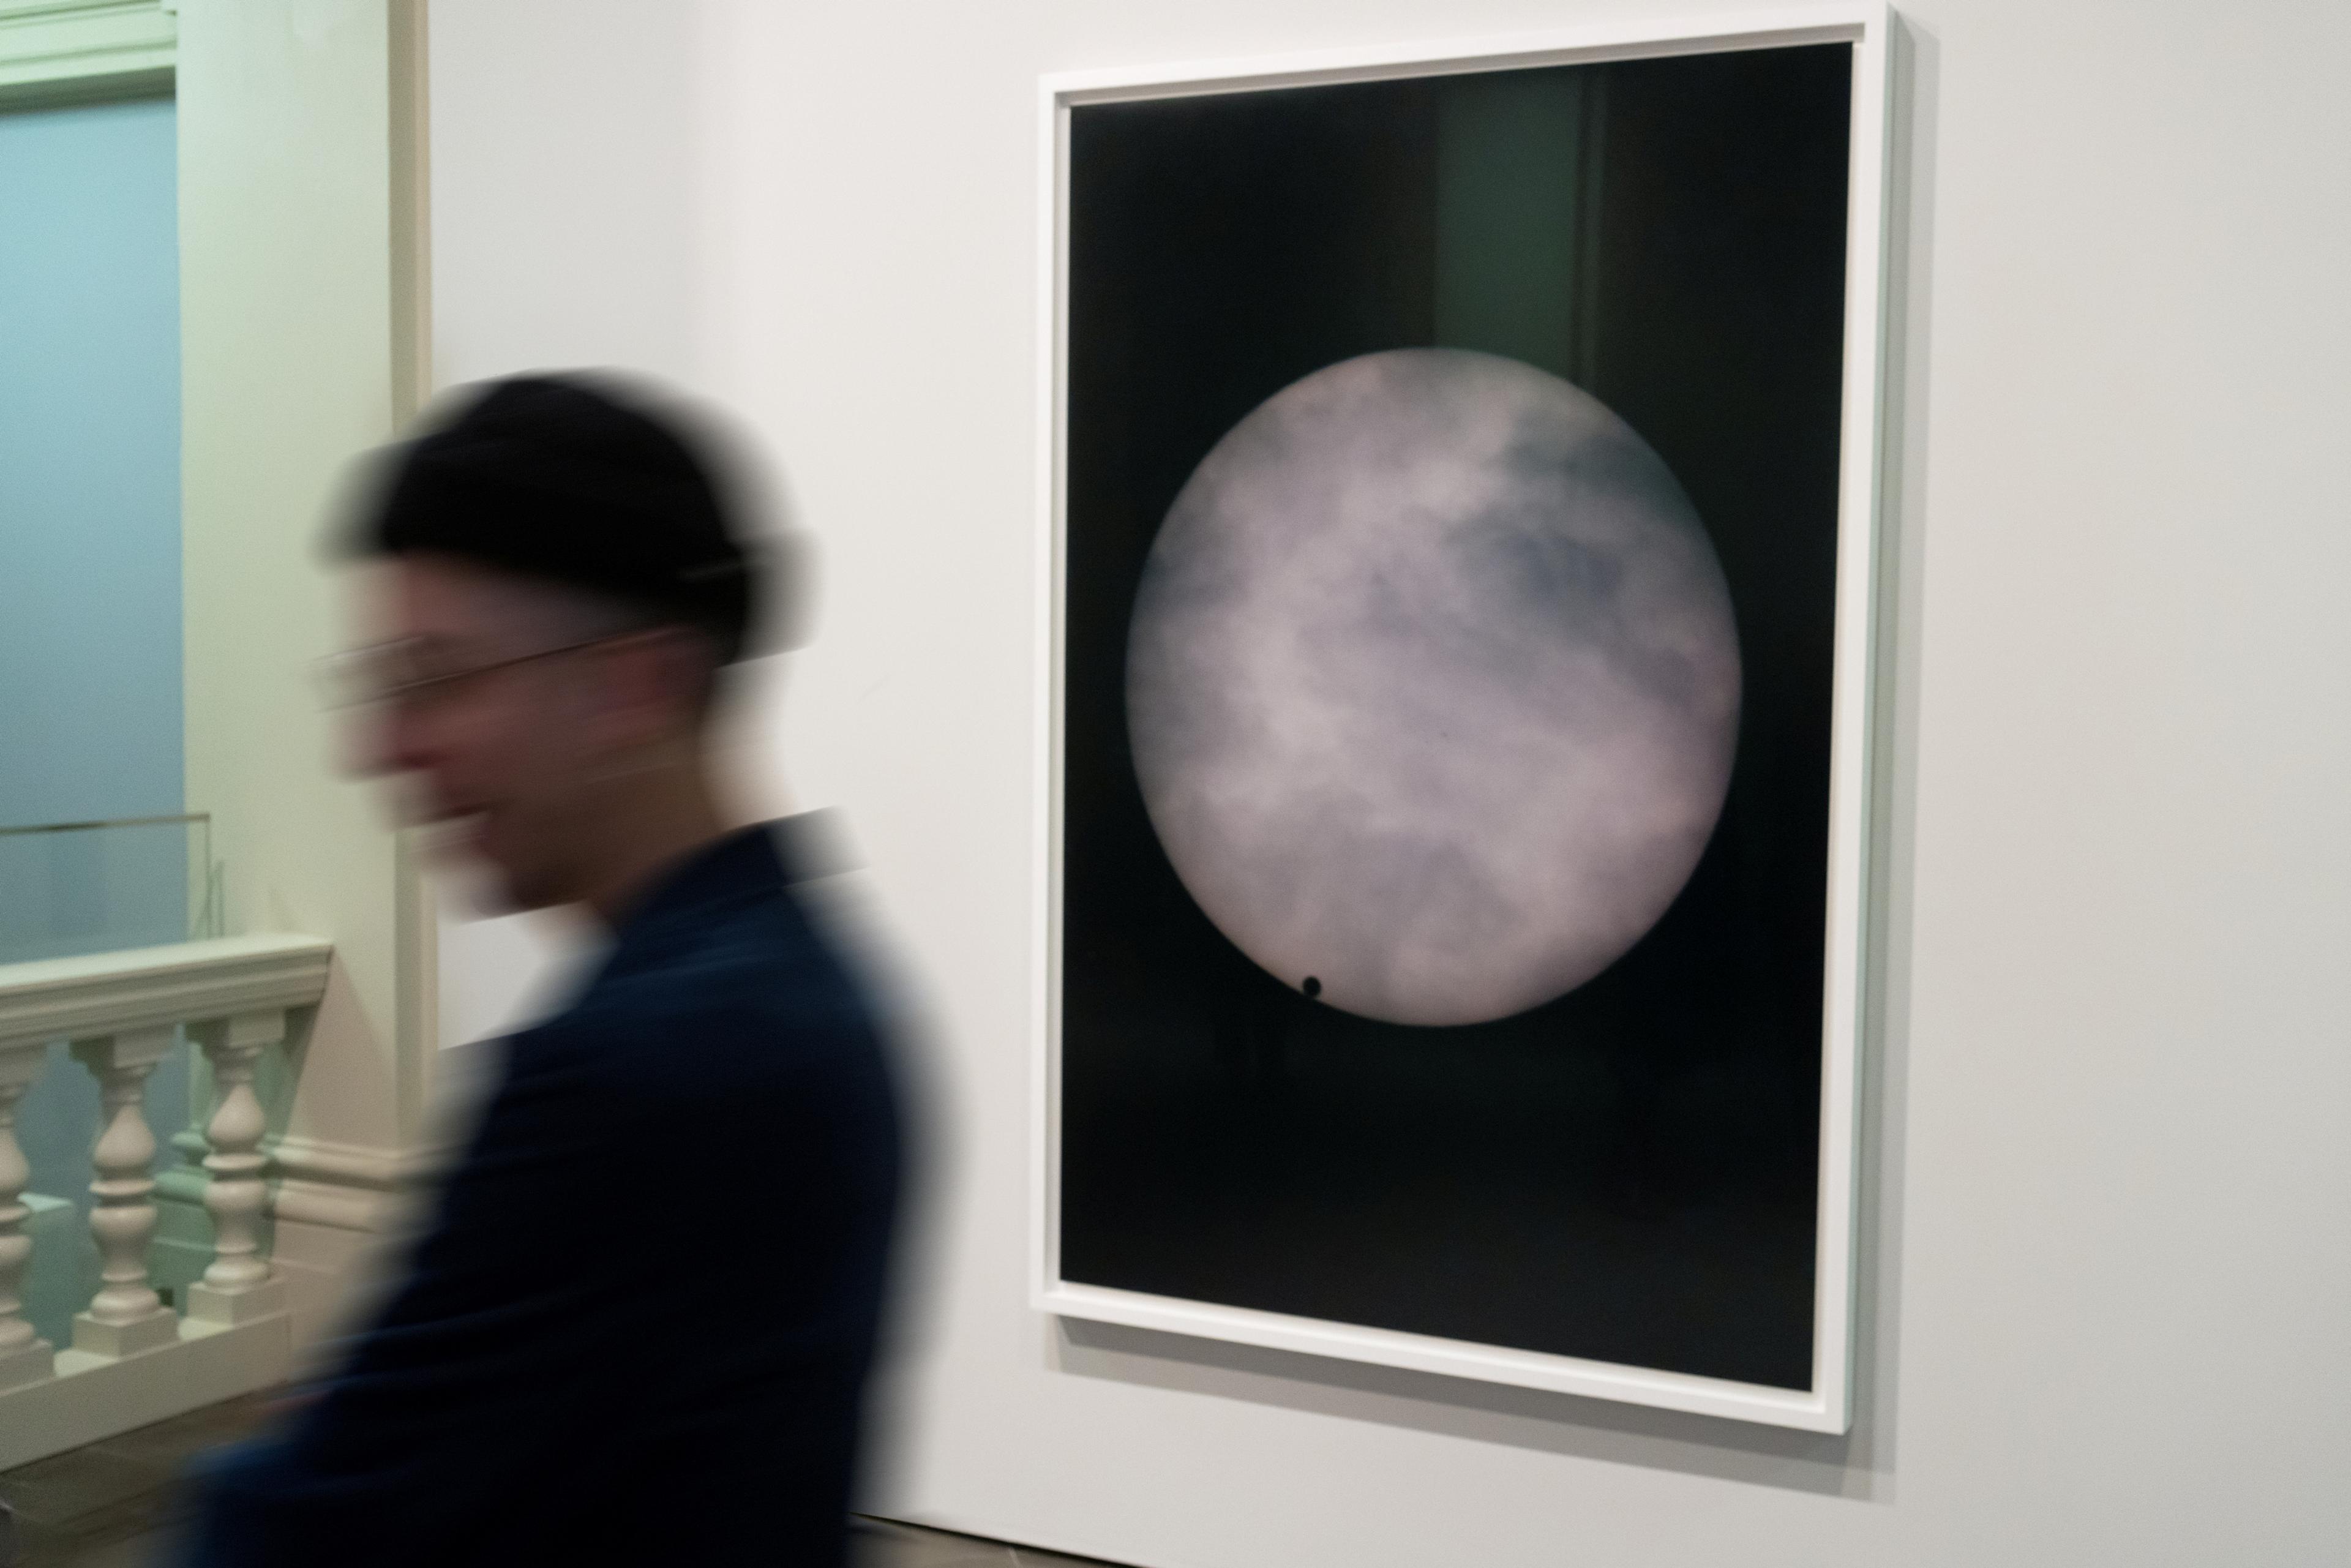 A man in front of an artwork depicting a moon